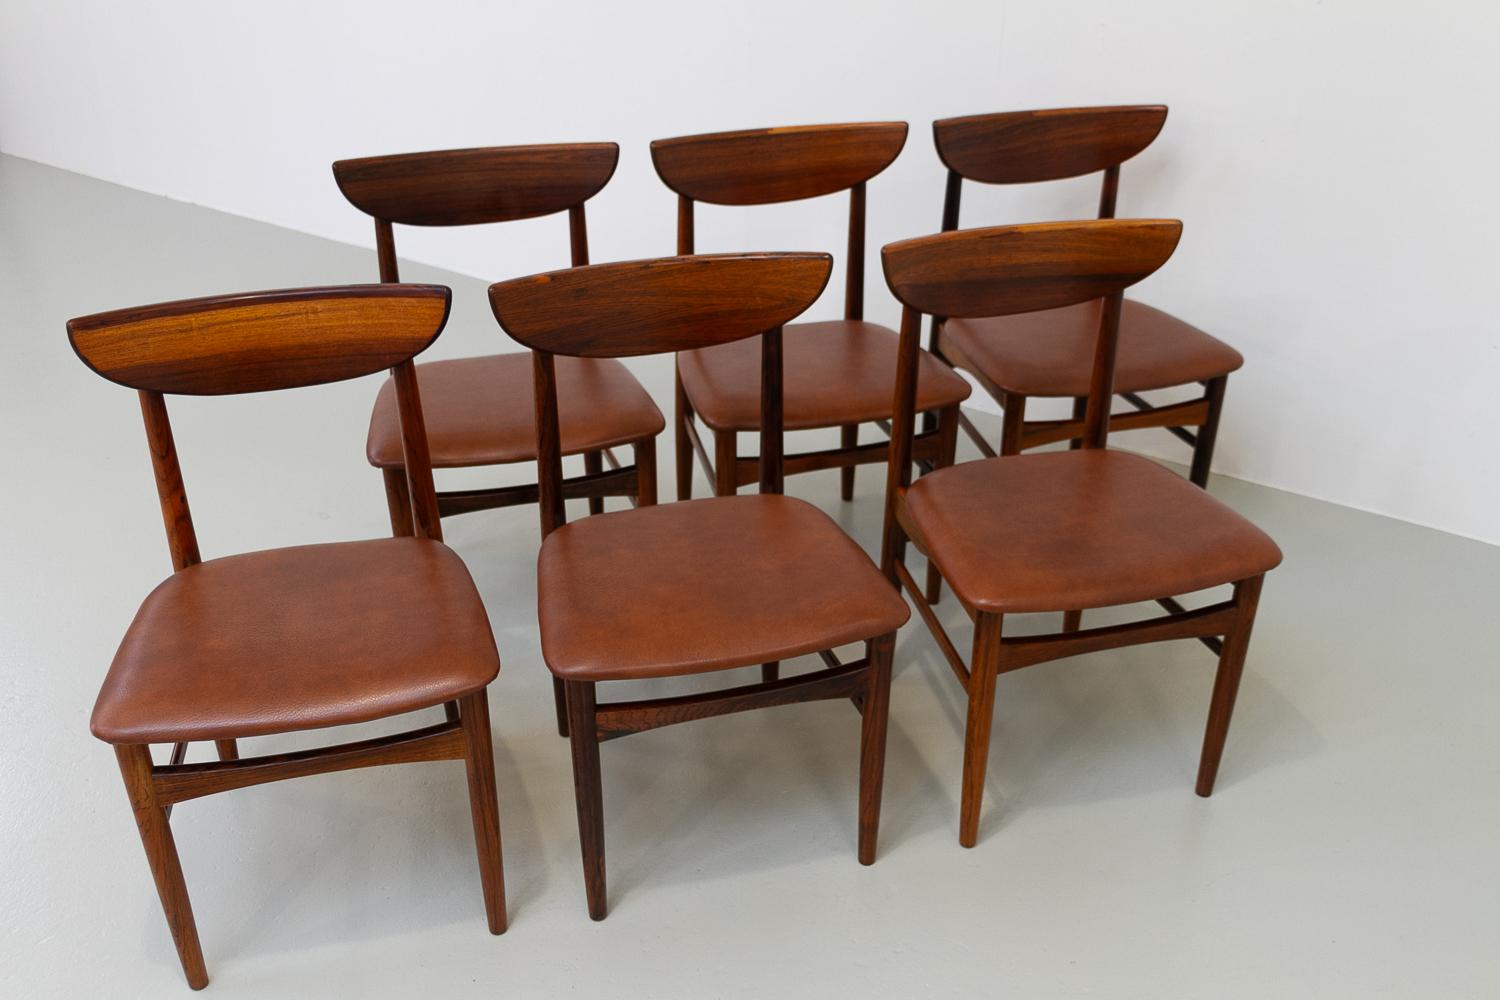 Vintage Danish Rosewood Dining Chairs by E.W. Bach for Skovby, 1960s. Set of 6. For Sale 4